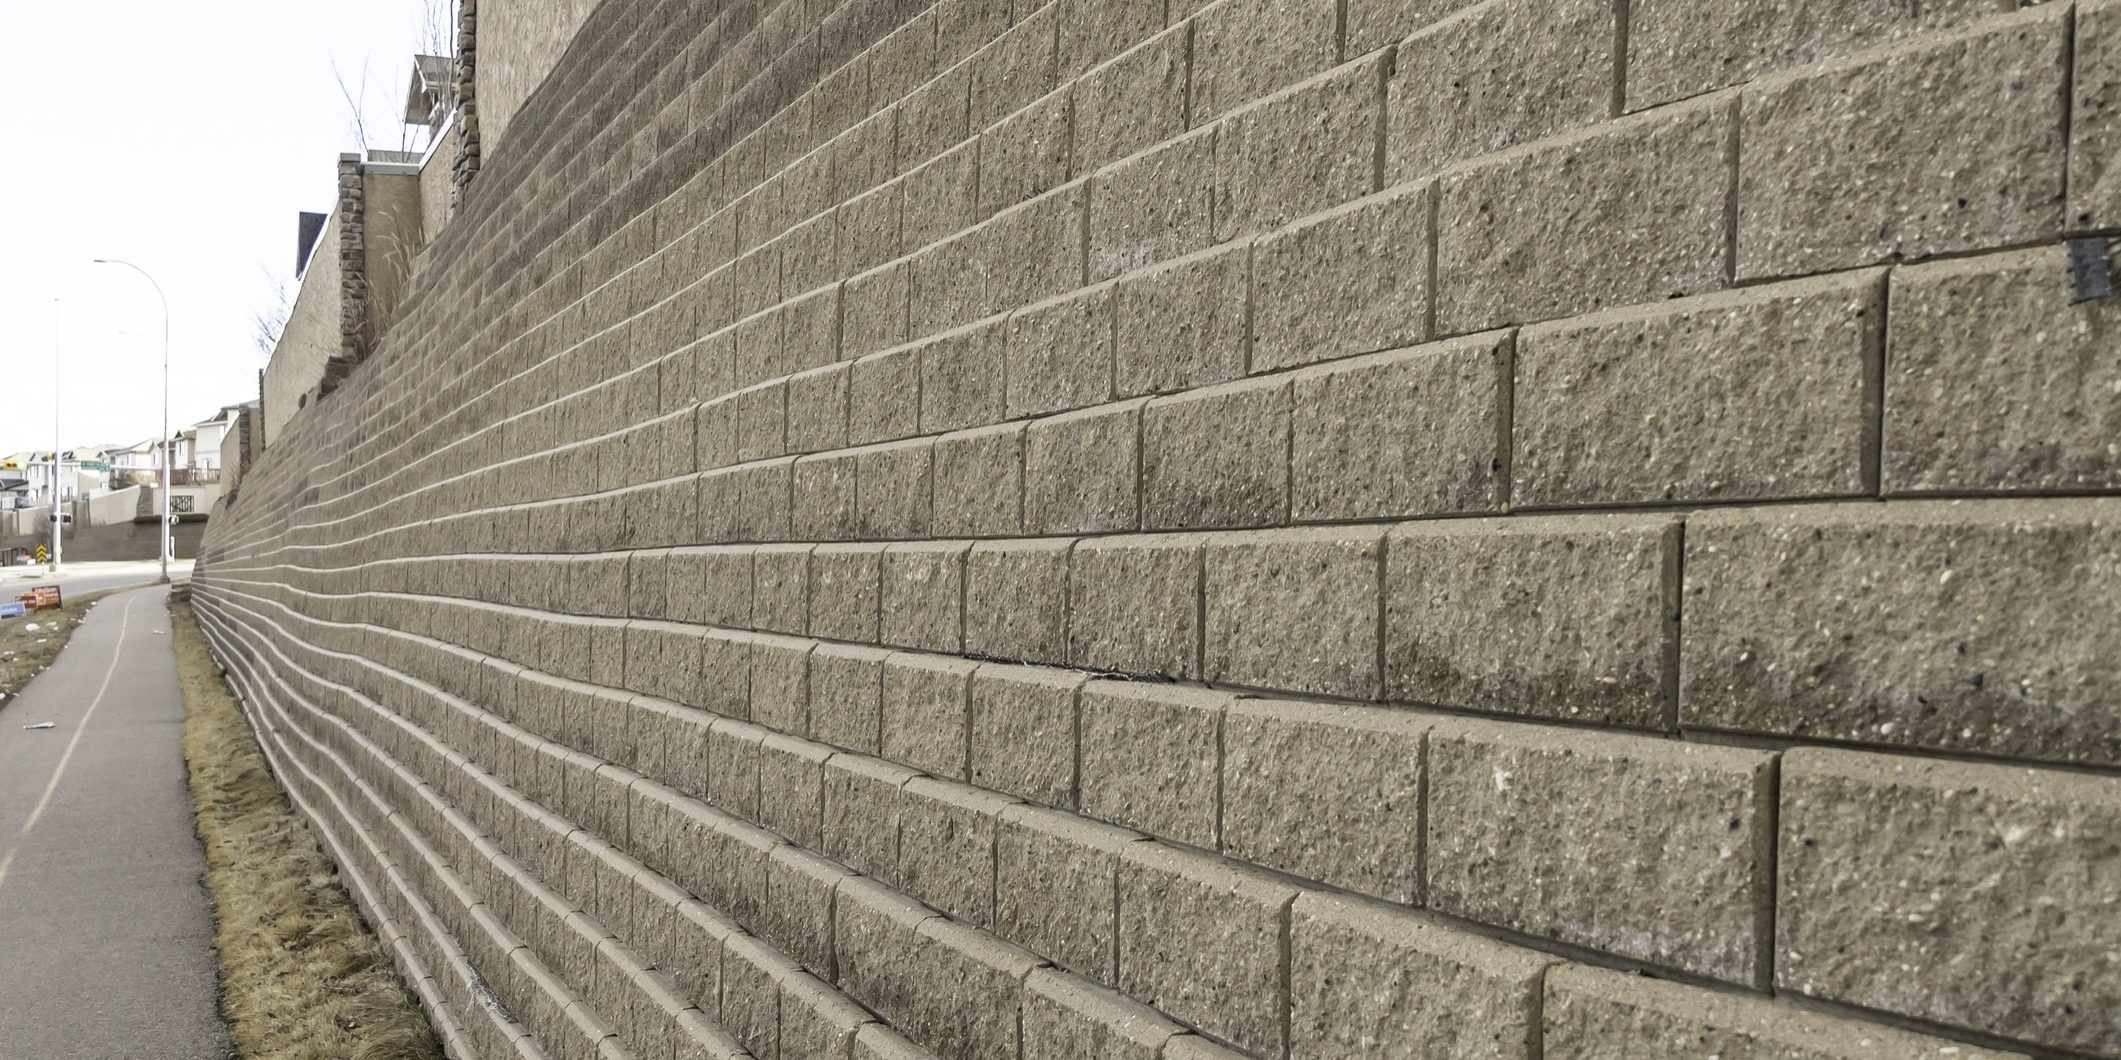 Retaining Wall Failures and Construction Defect Claims